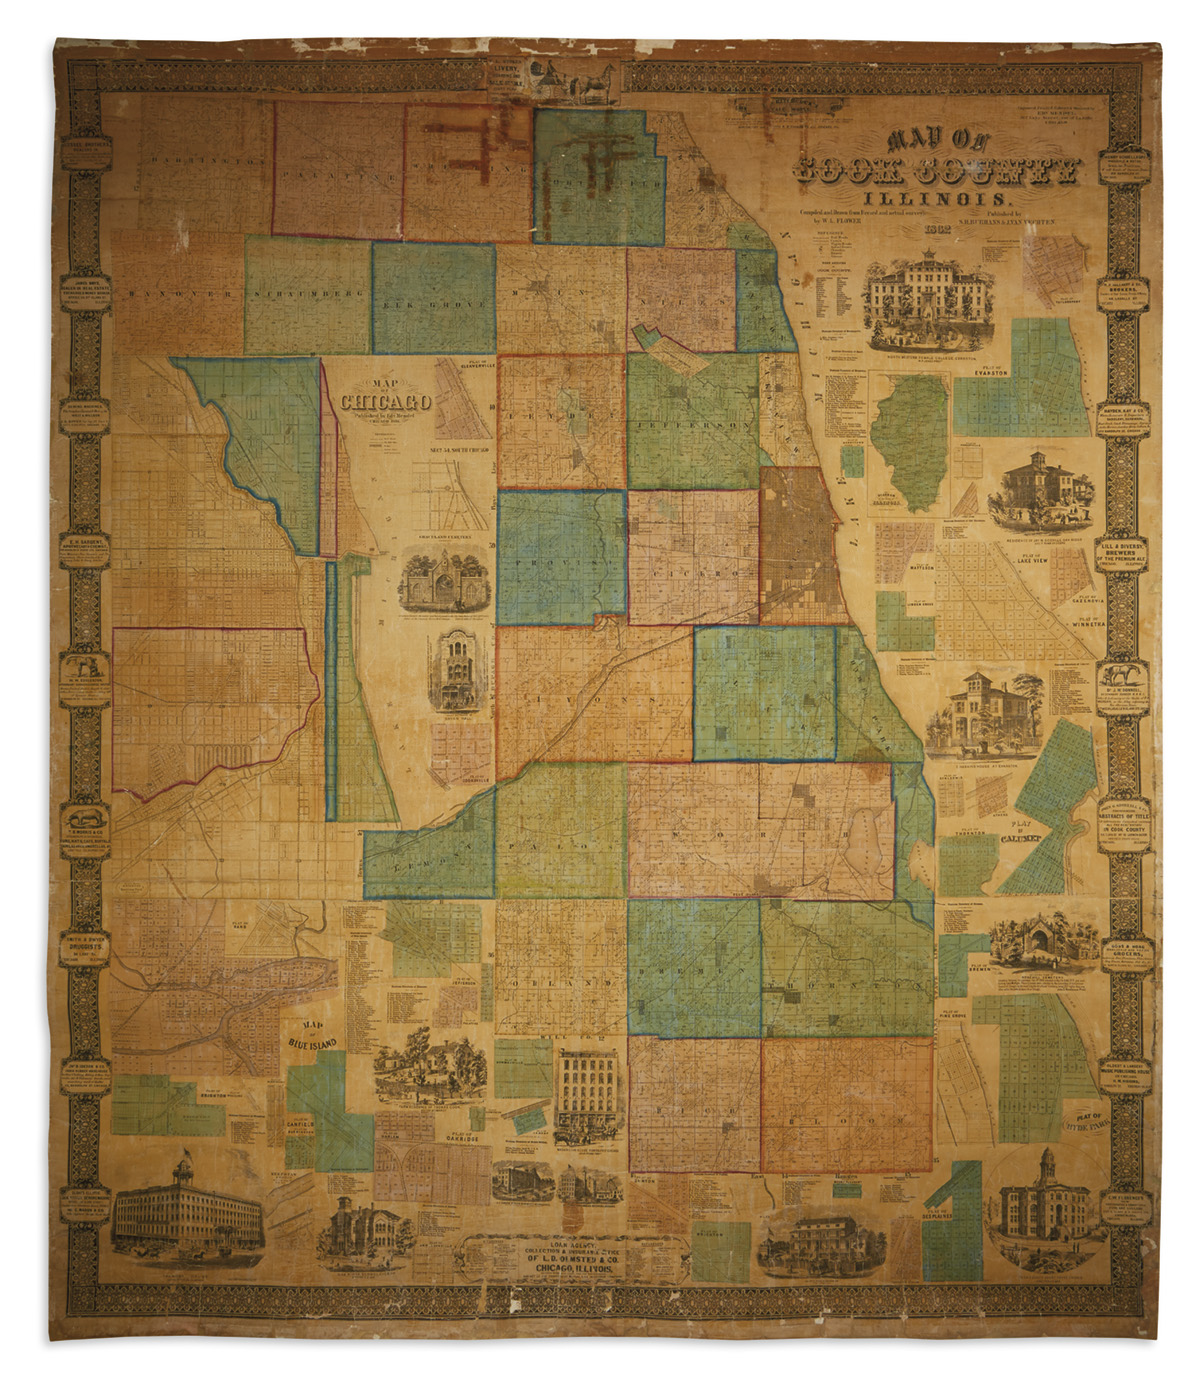 (CHICAGO.) Flower, J.W. Map of Cook County Illinois.